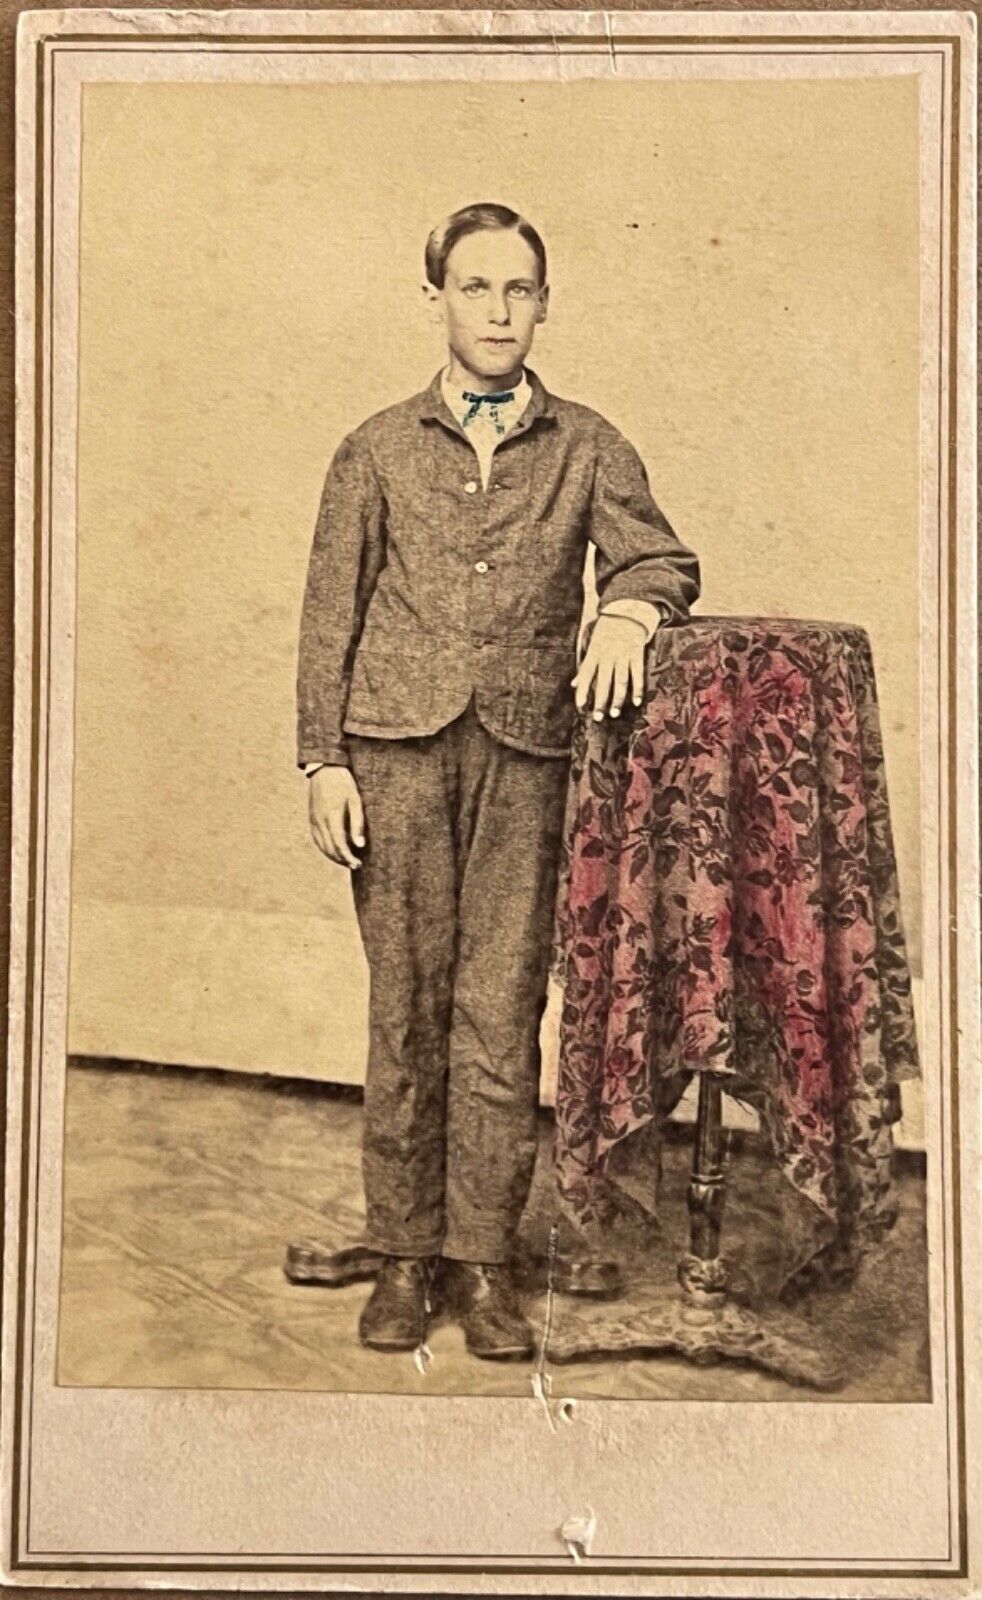 Mobile Alabama Young Teenage Boy Lean on Table Antique CDV Photograph